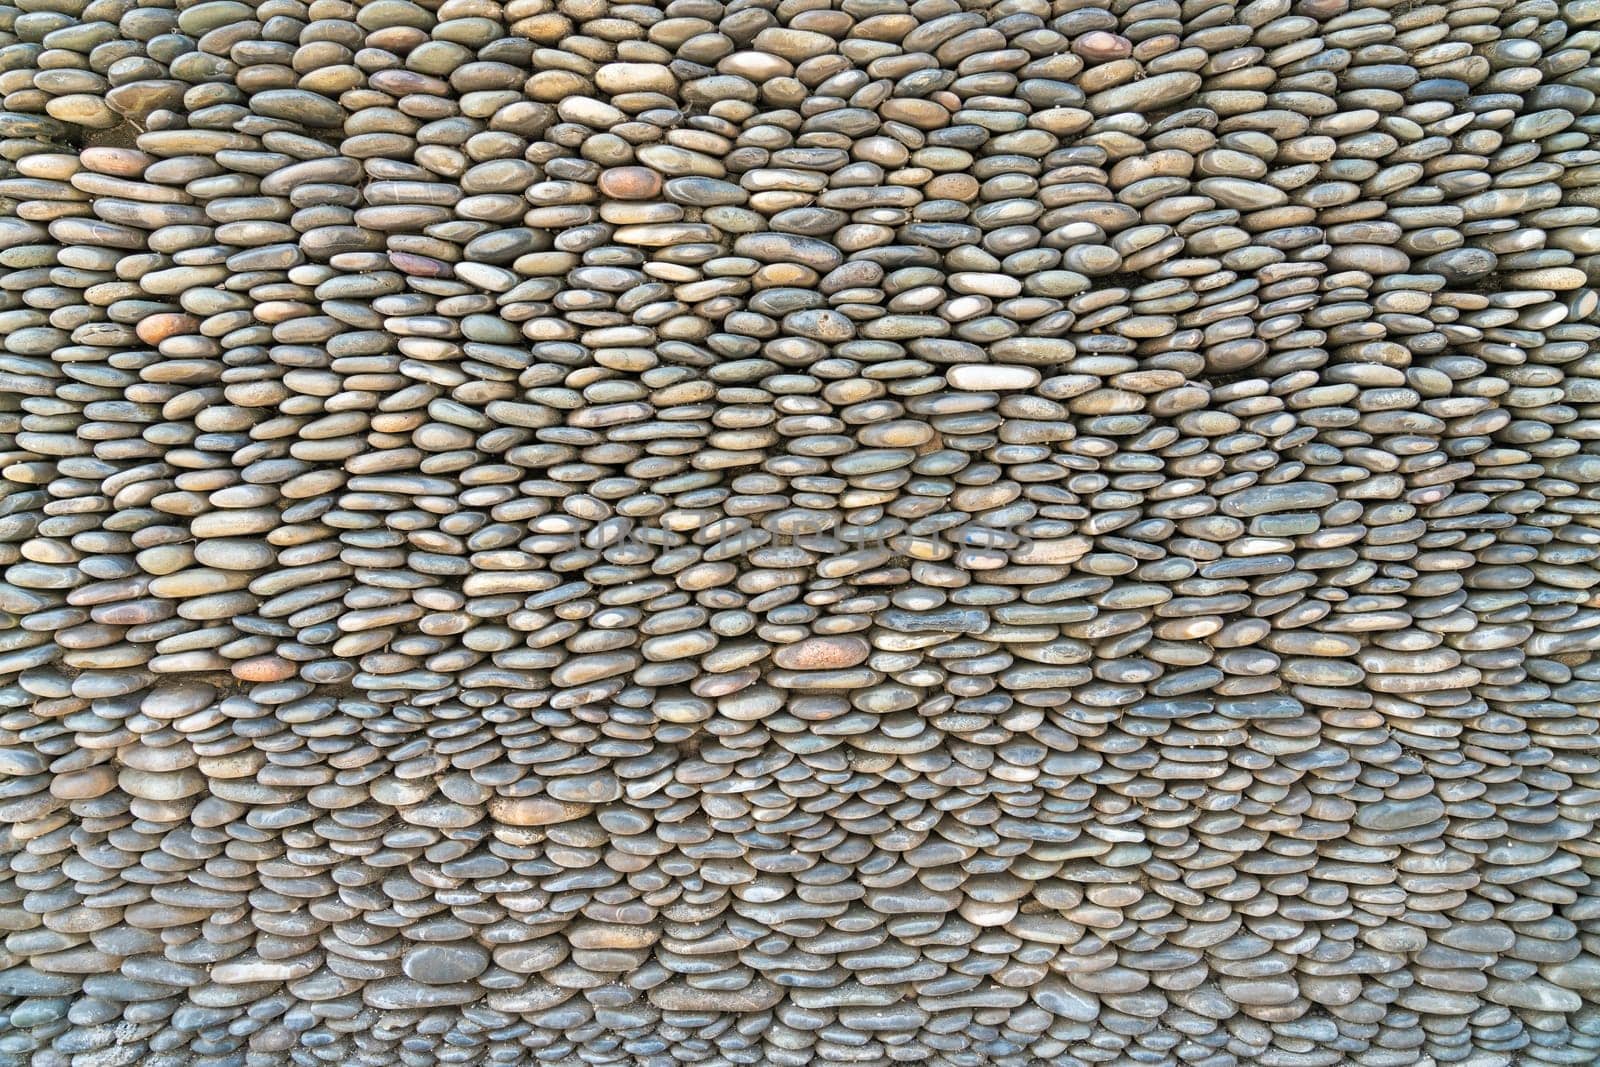 the texture of the pebbles in close-up as a background by roman112007